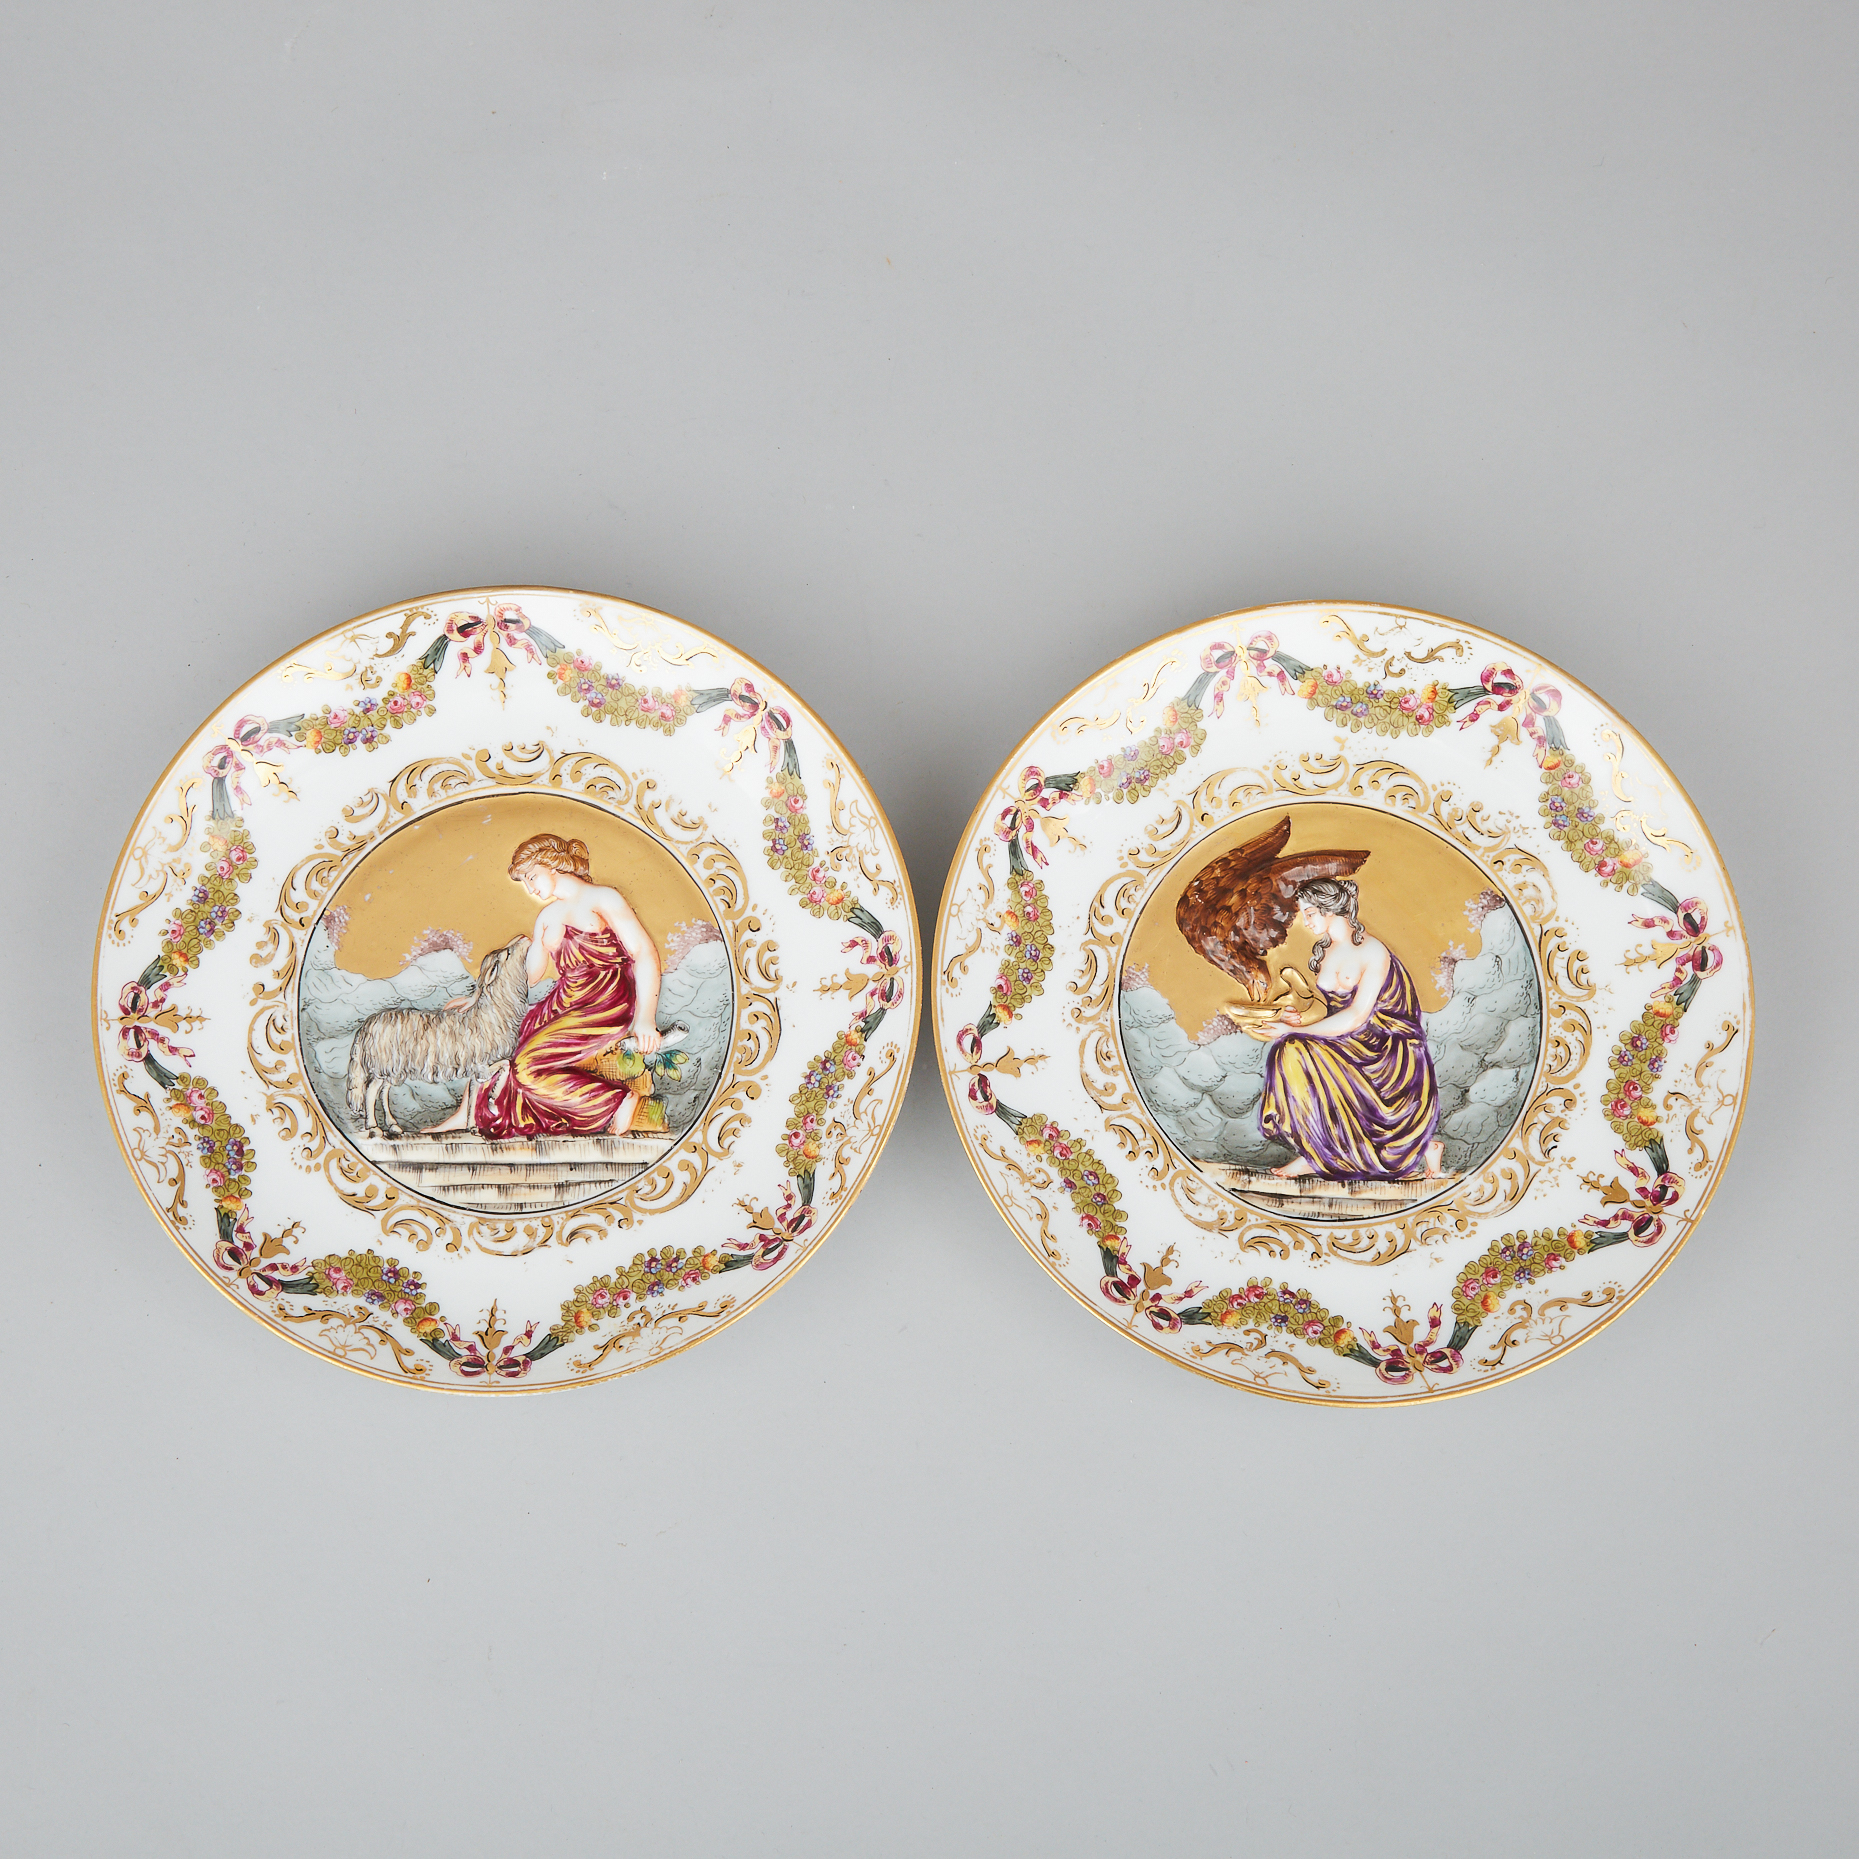 Pair of 'Naples' Plates, early 20th century